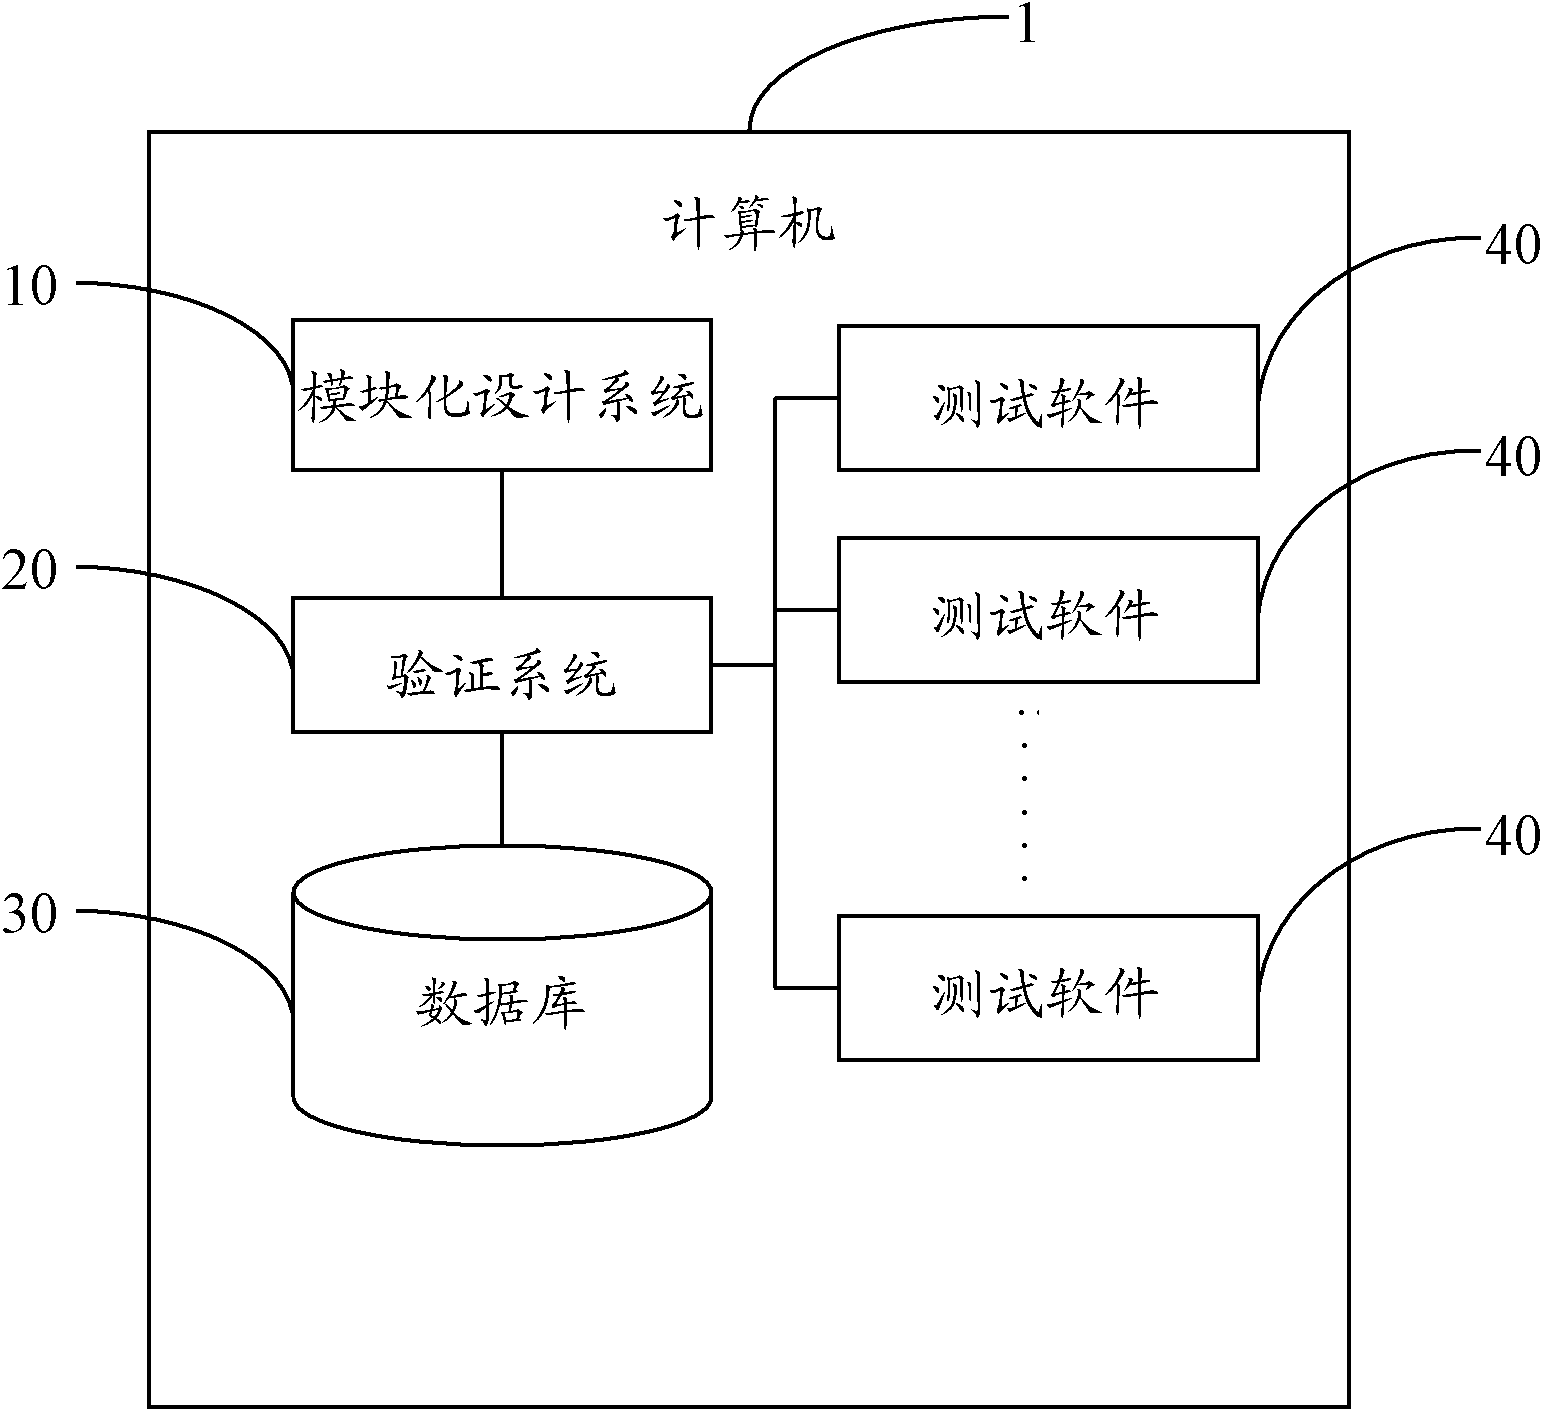 Verification system and method for electronic product design